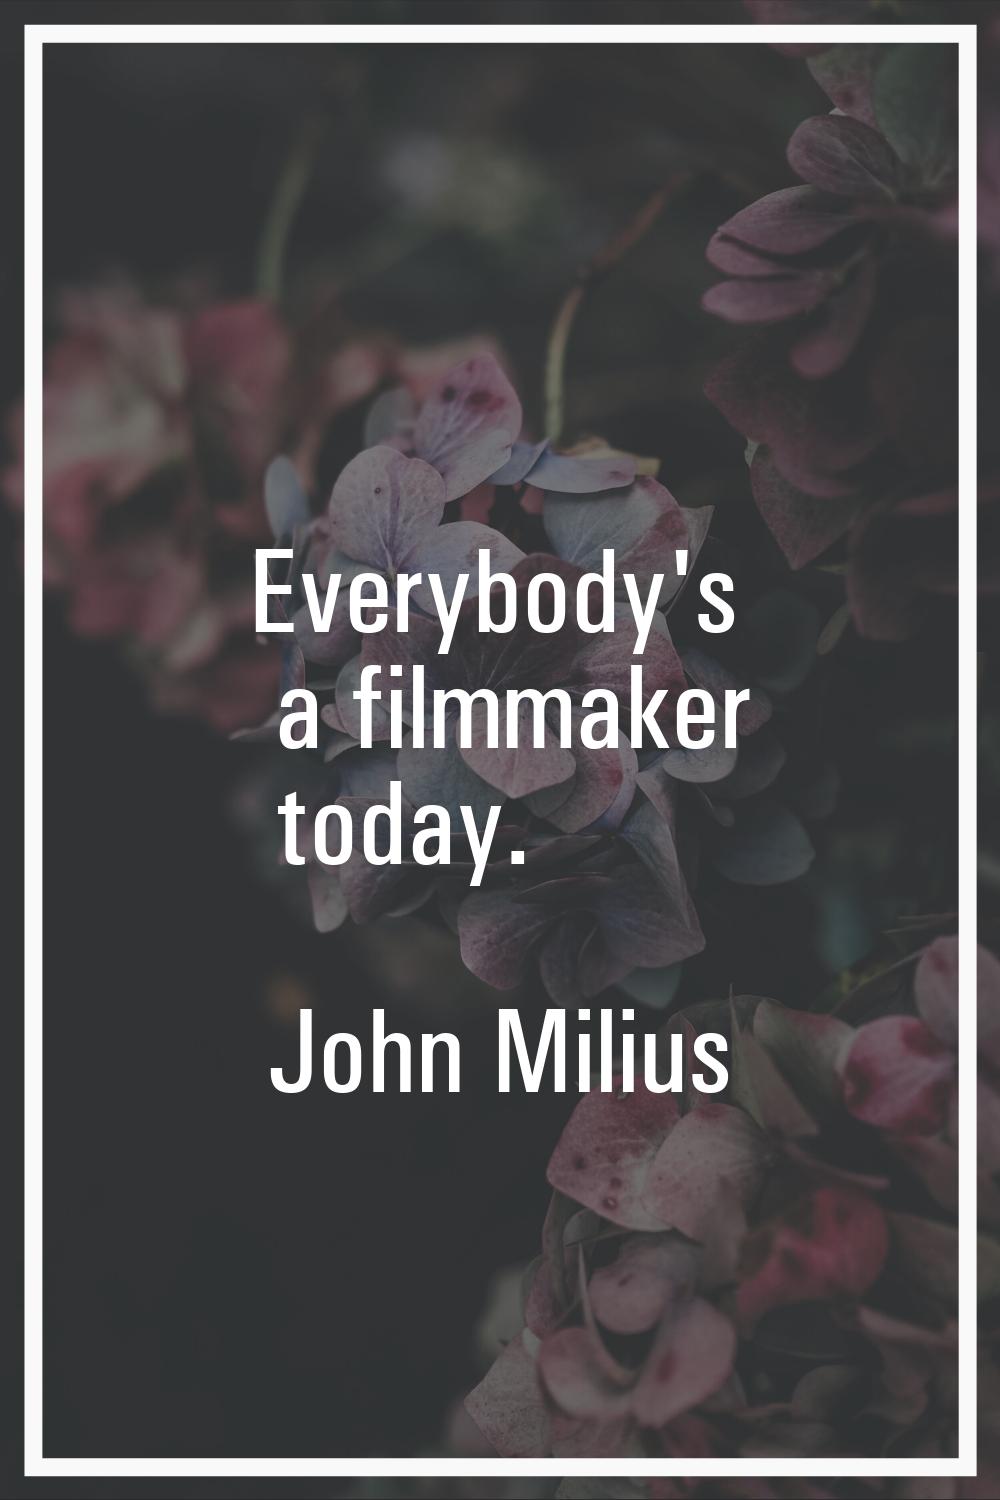 Everybody's a filmmaker today.